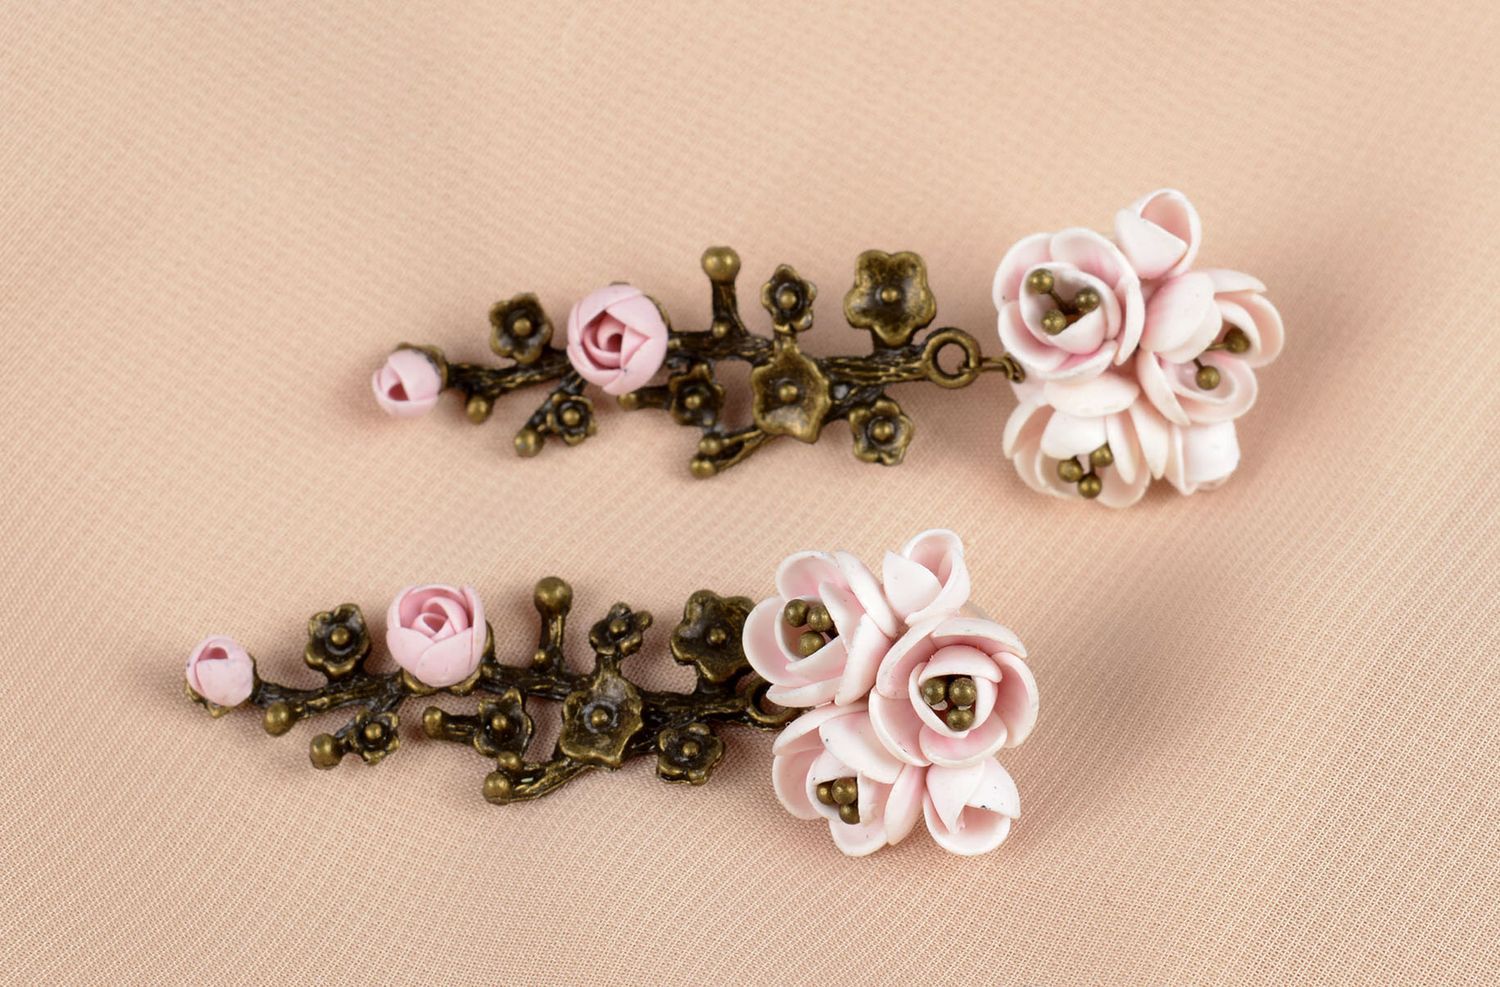 Handmade polymer clay earrings with charms delicate earrings with pink flowers photo 1